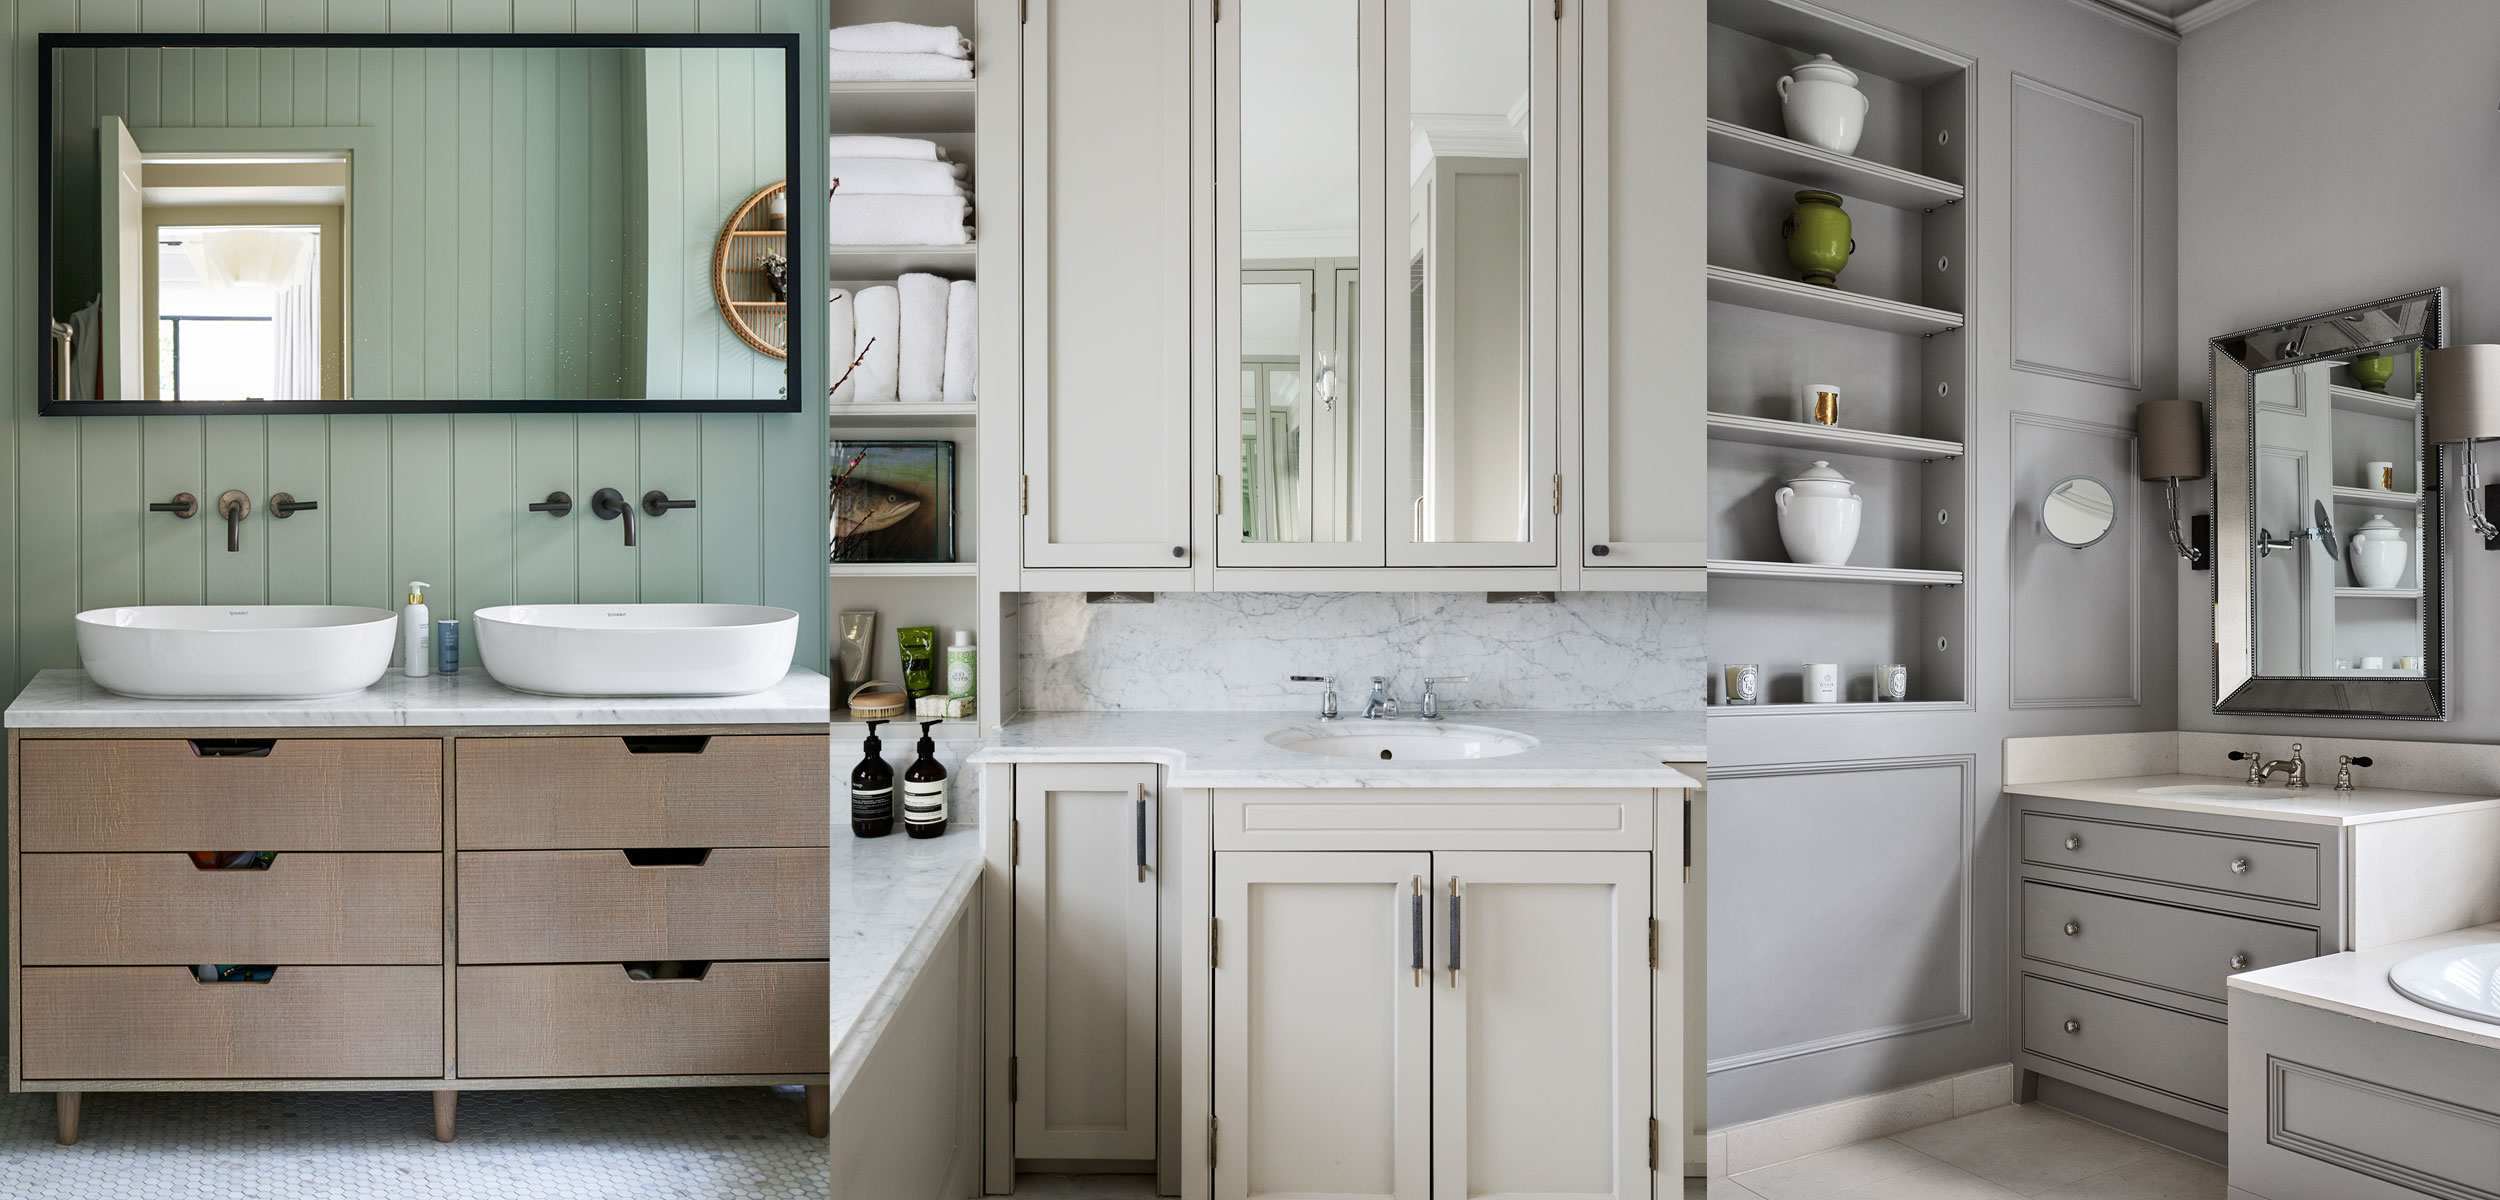 Bathroom cabinet ideas: 10 smart cupboards and cabinets